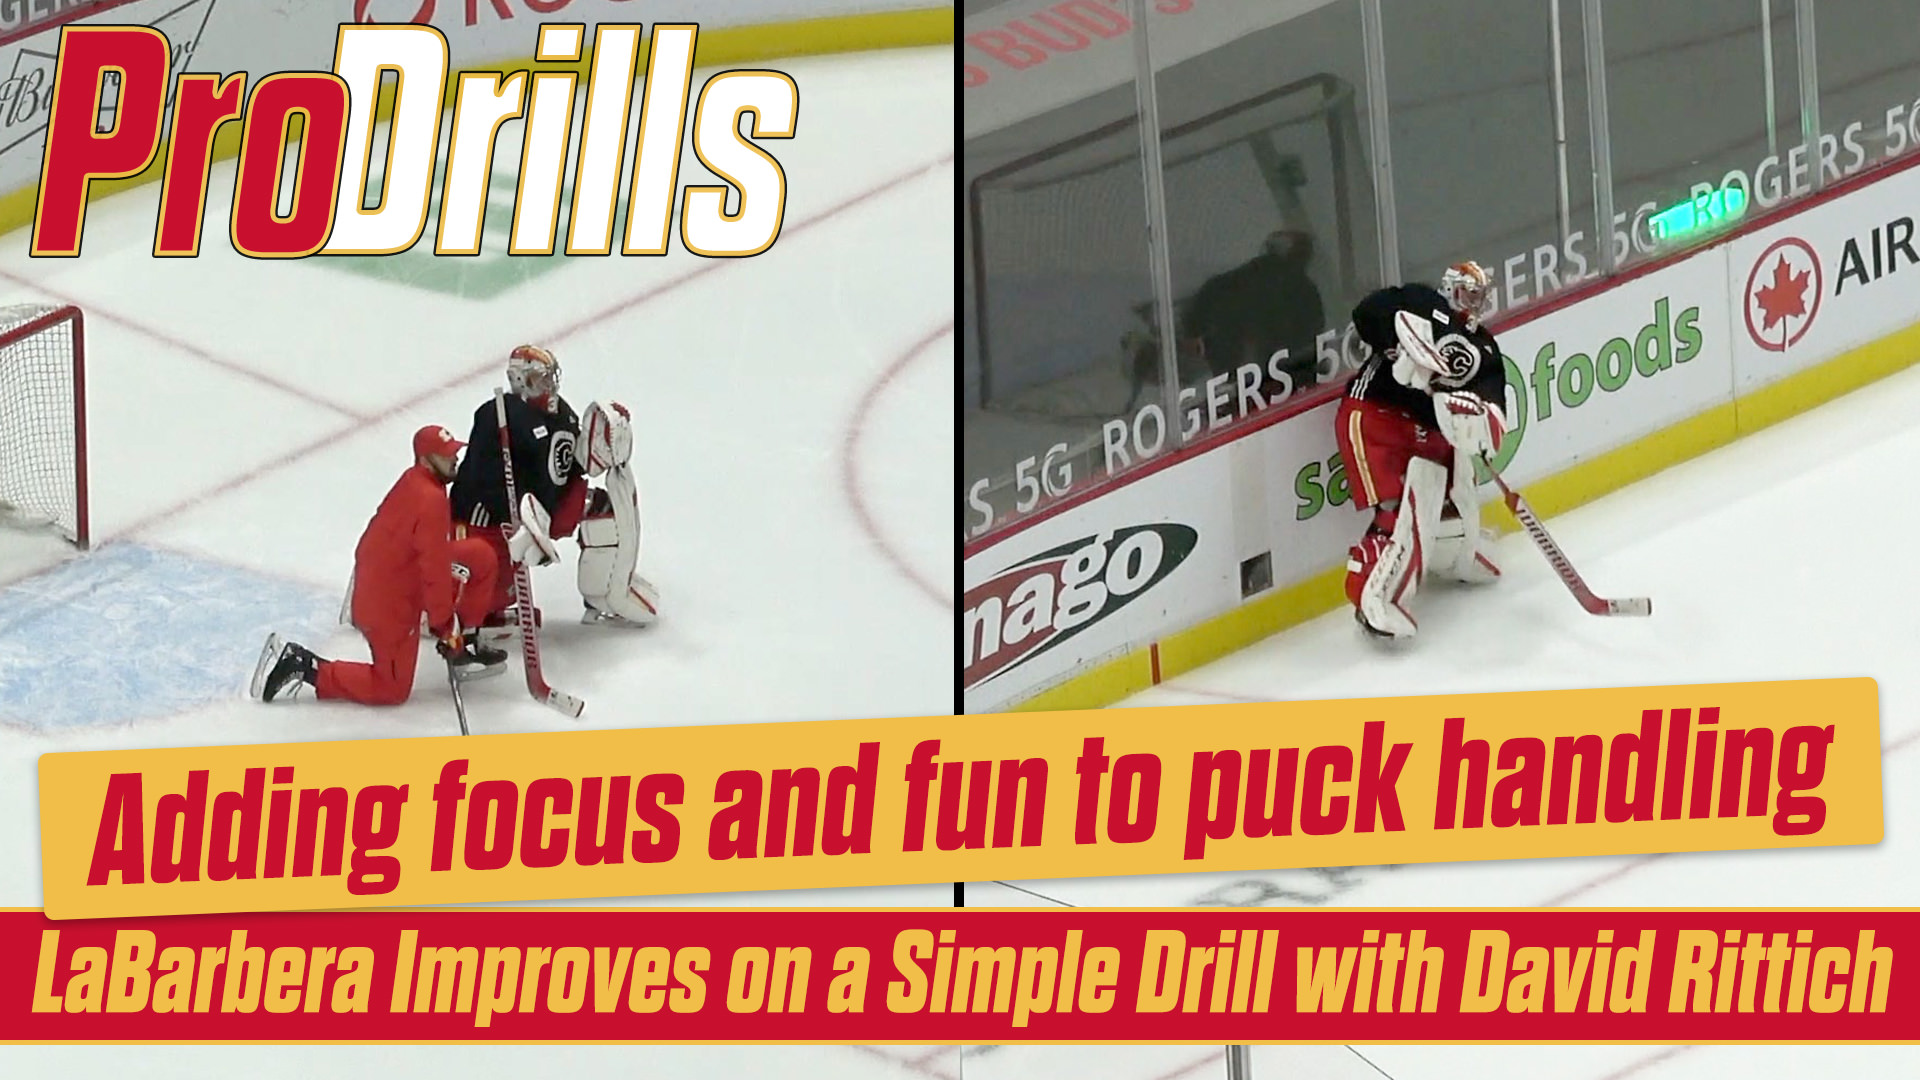 Adding focus and fun to puck handling